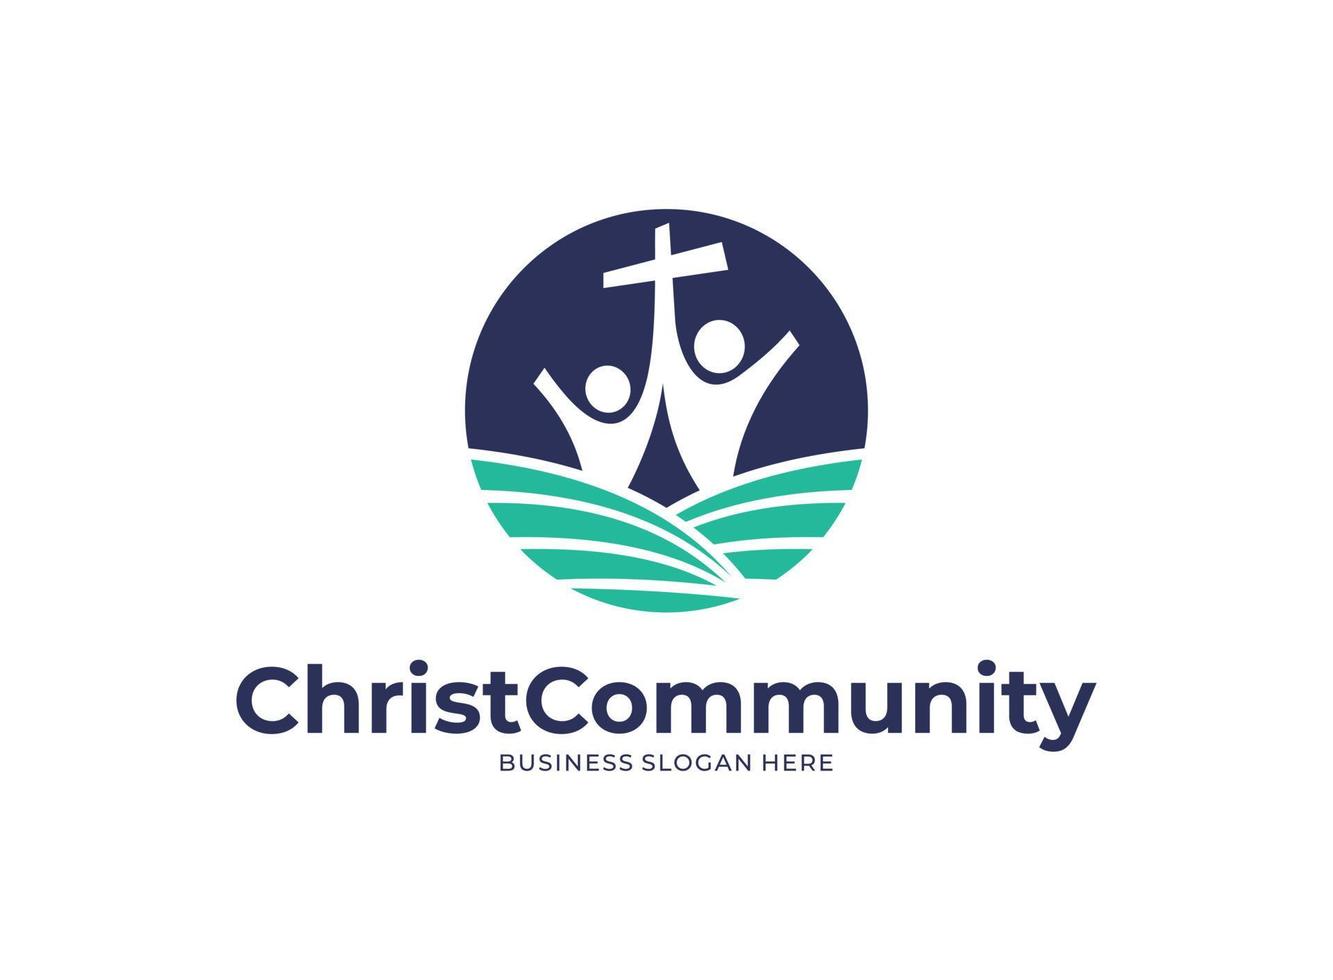 Illustration vector graphic of Christ community logo designs concept. Perfect for community, education, bible, catholic.